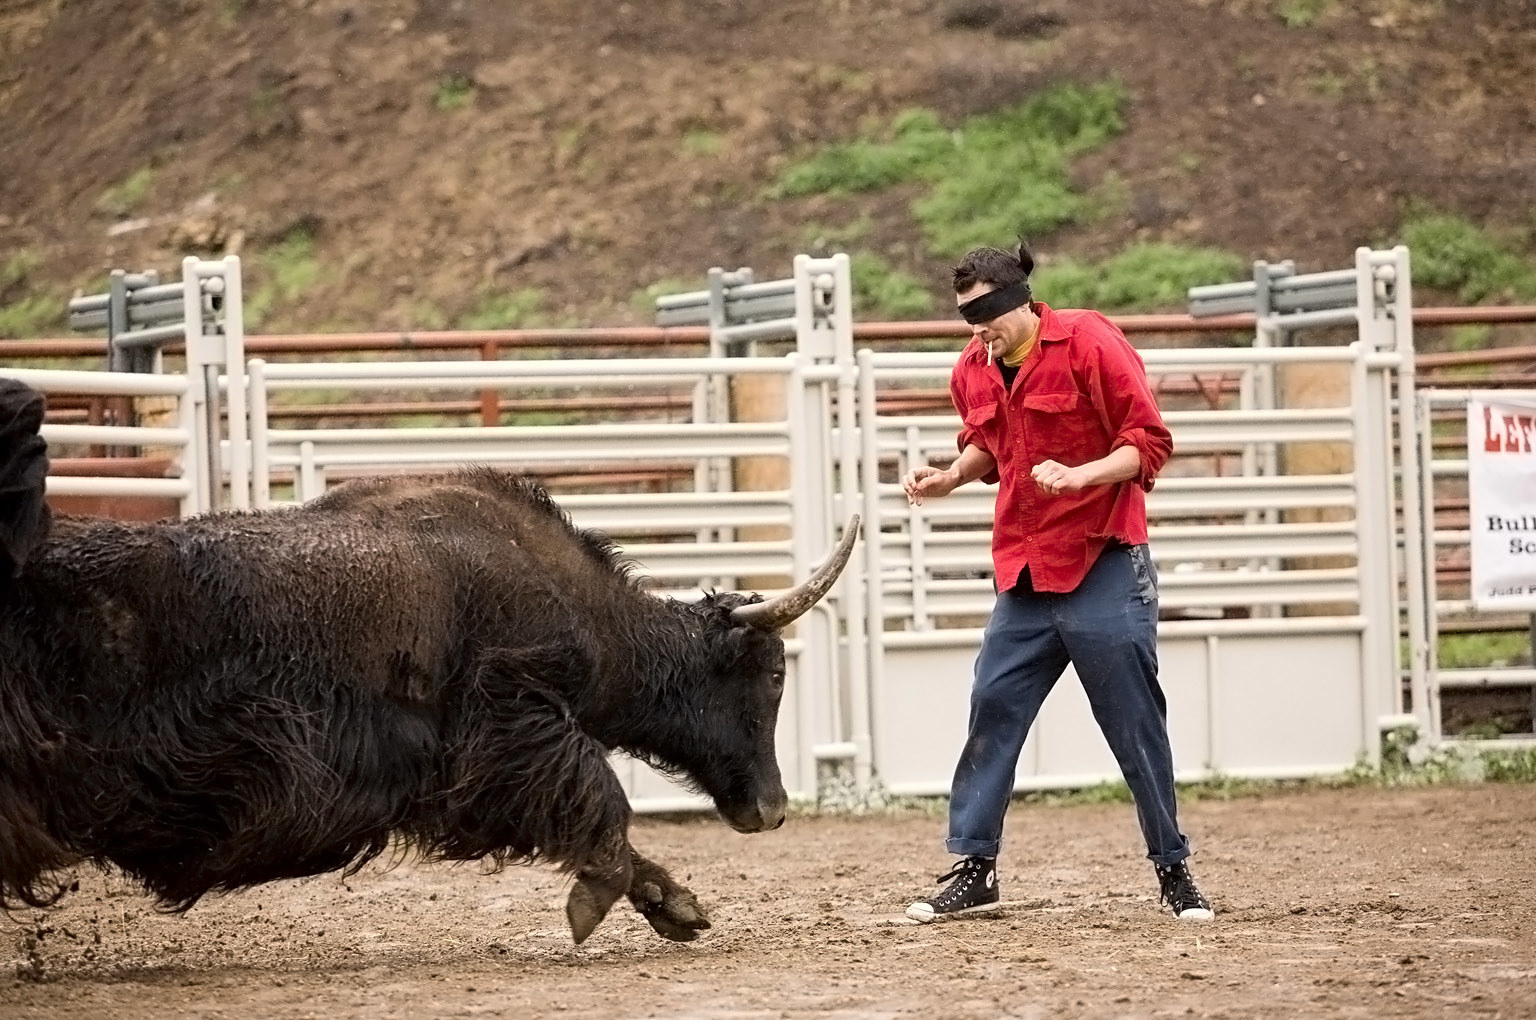 Johnny Knoxville blindfolded in front of a bull.